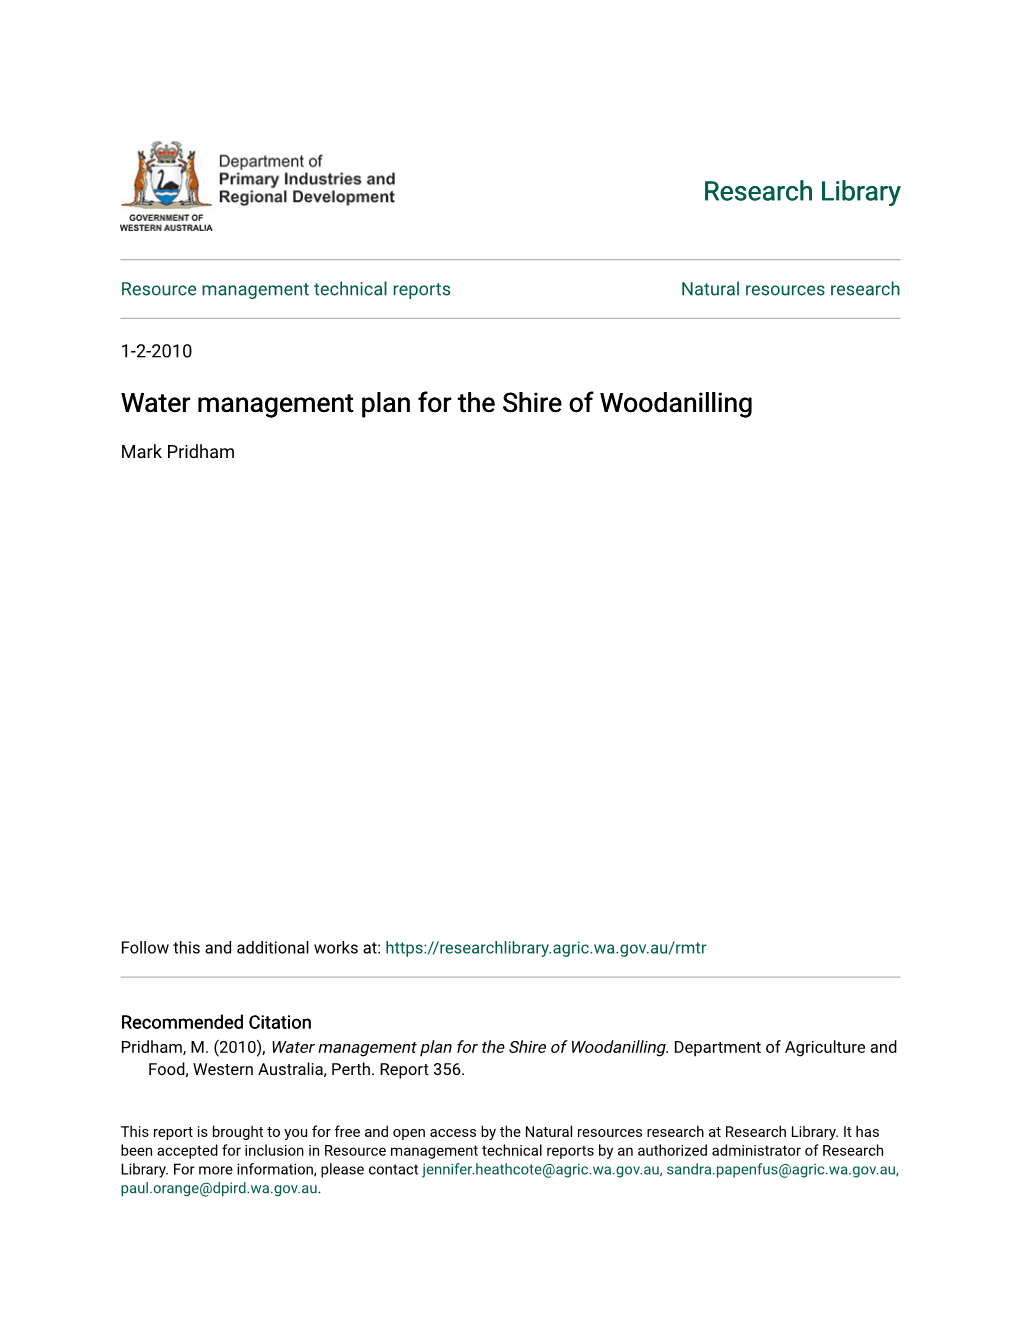 Water Management Plan for the Shire of Woodanilling